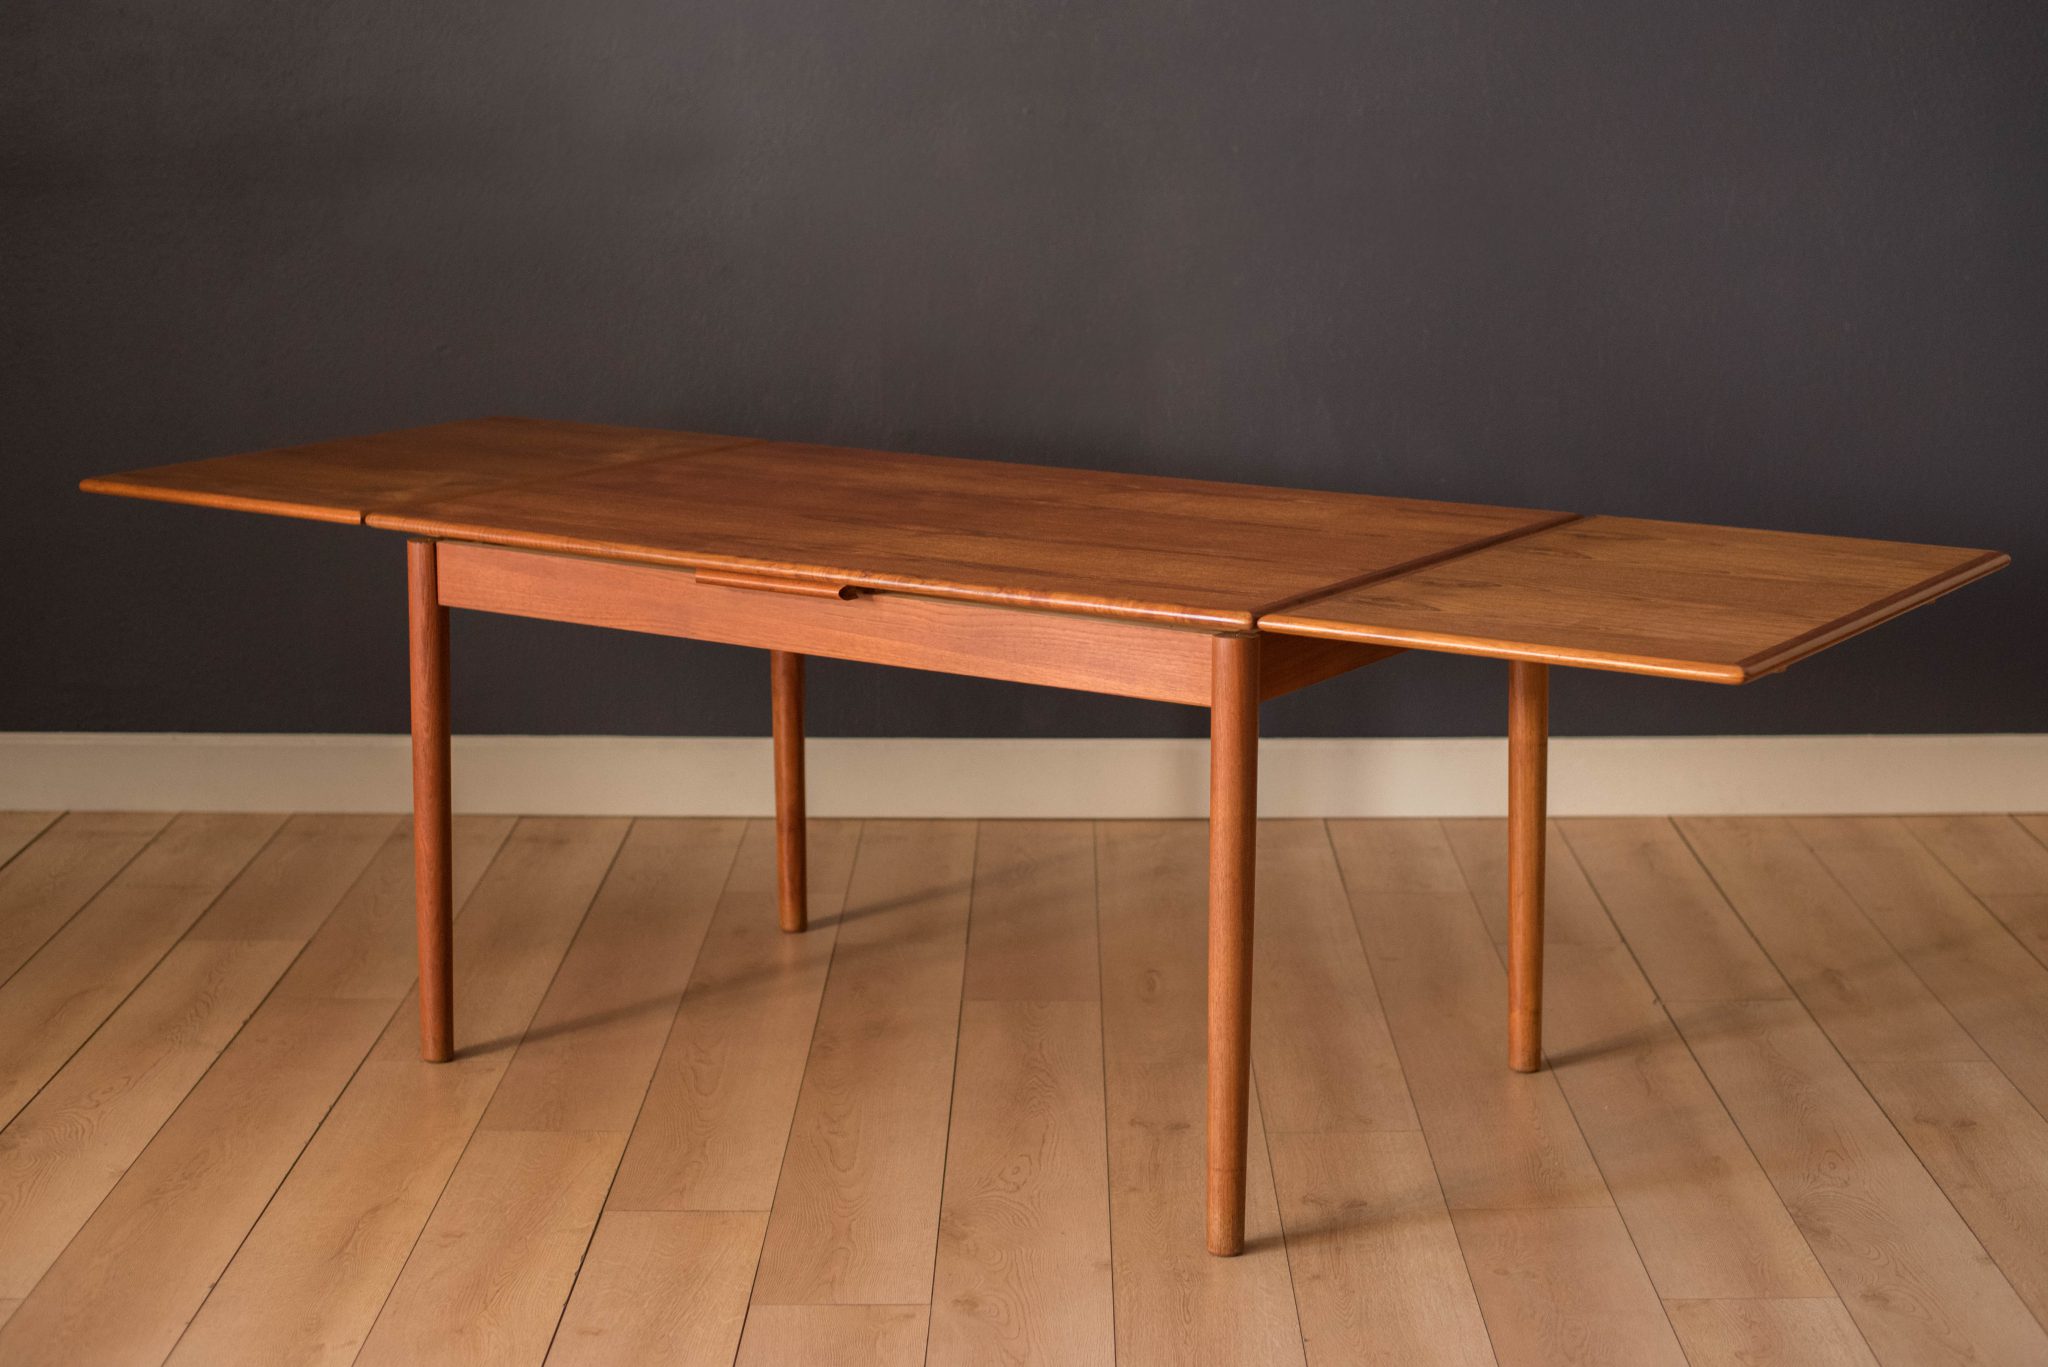 Durable Teak Dining Table: A Long Lasting Investment